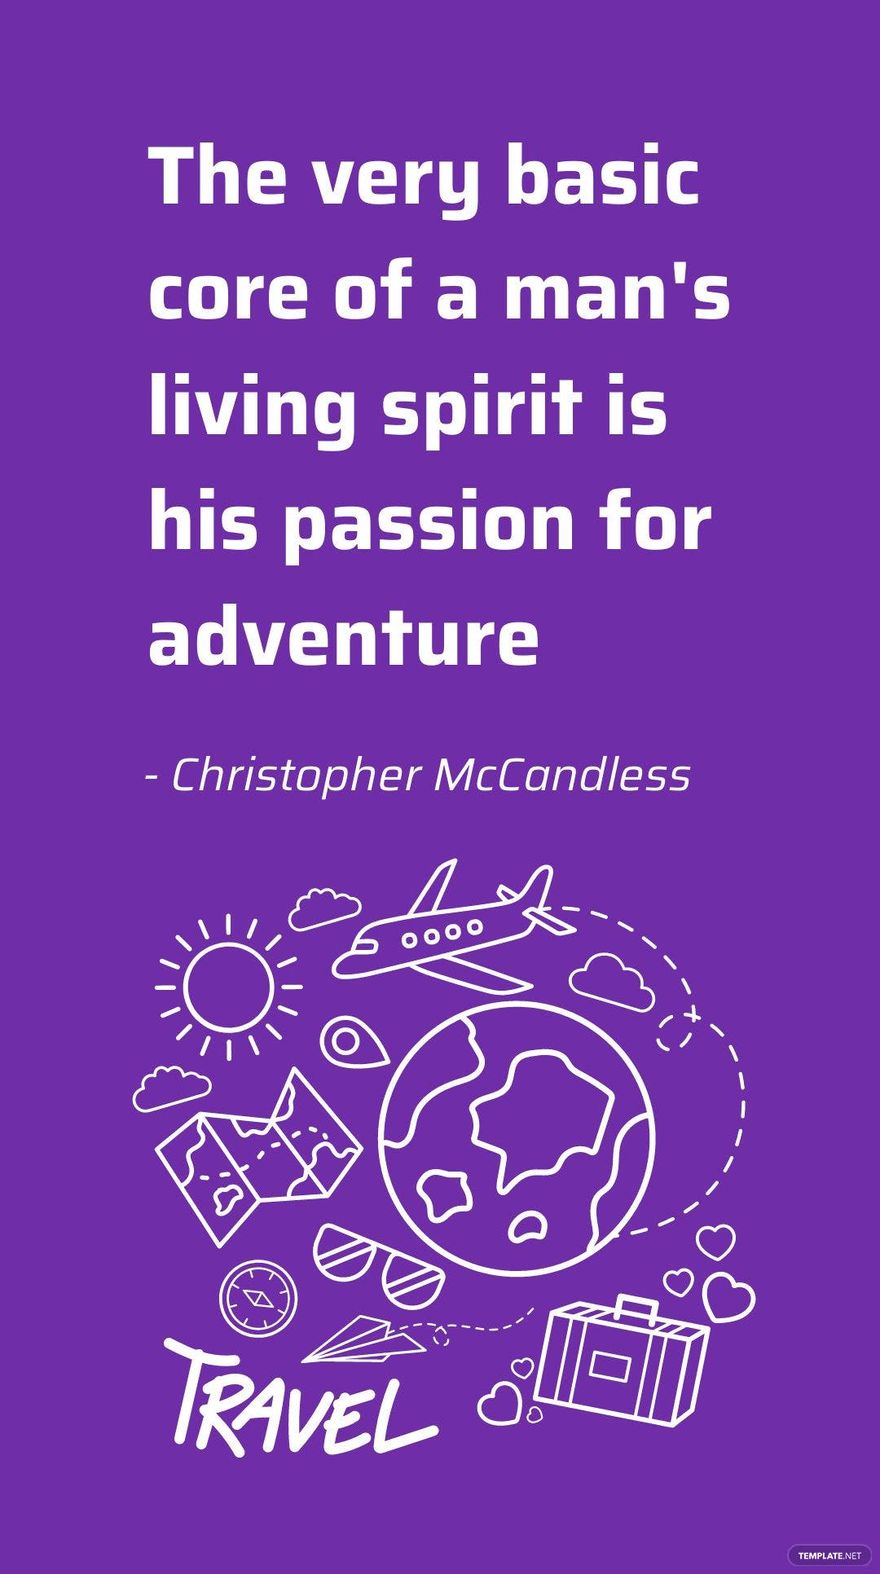 Christopher McCandless - The very basic core of a man's living spirit is his passion for adventure